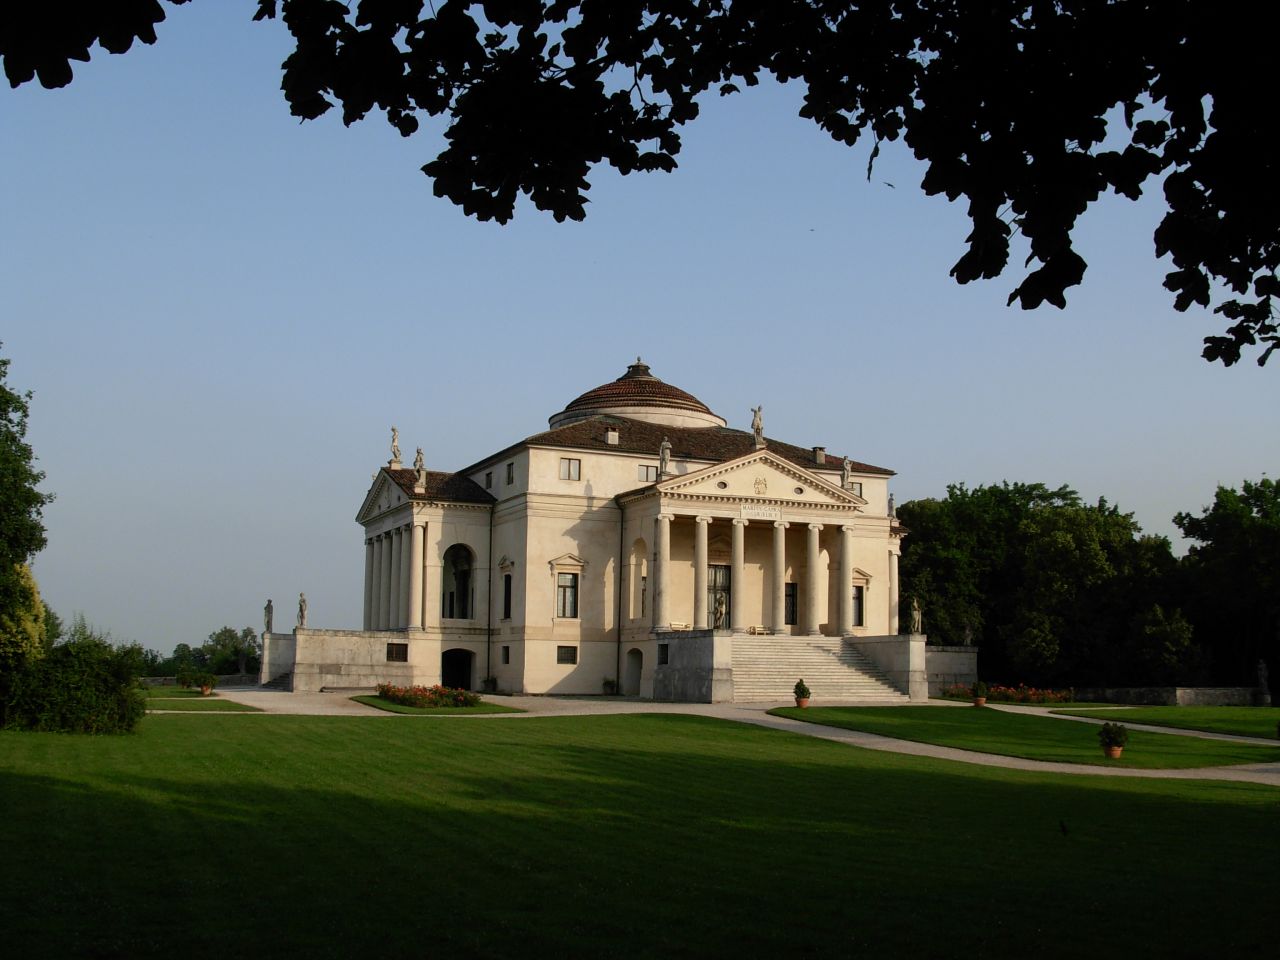 Villa La Rotonda was built in 1567 by world renowned architect Andrea Palladio. Current owner Count Niccolo Valmarana opens it to tours and for private events. 